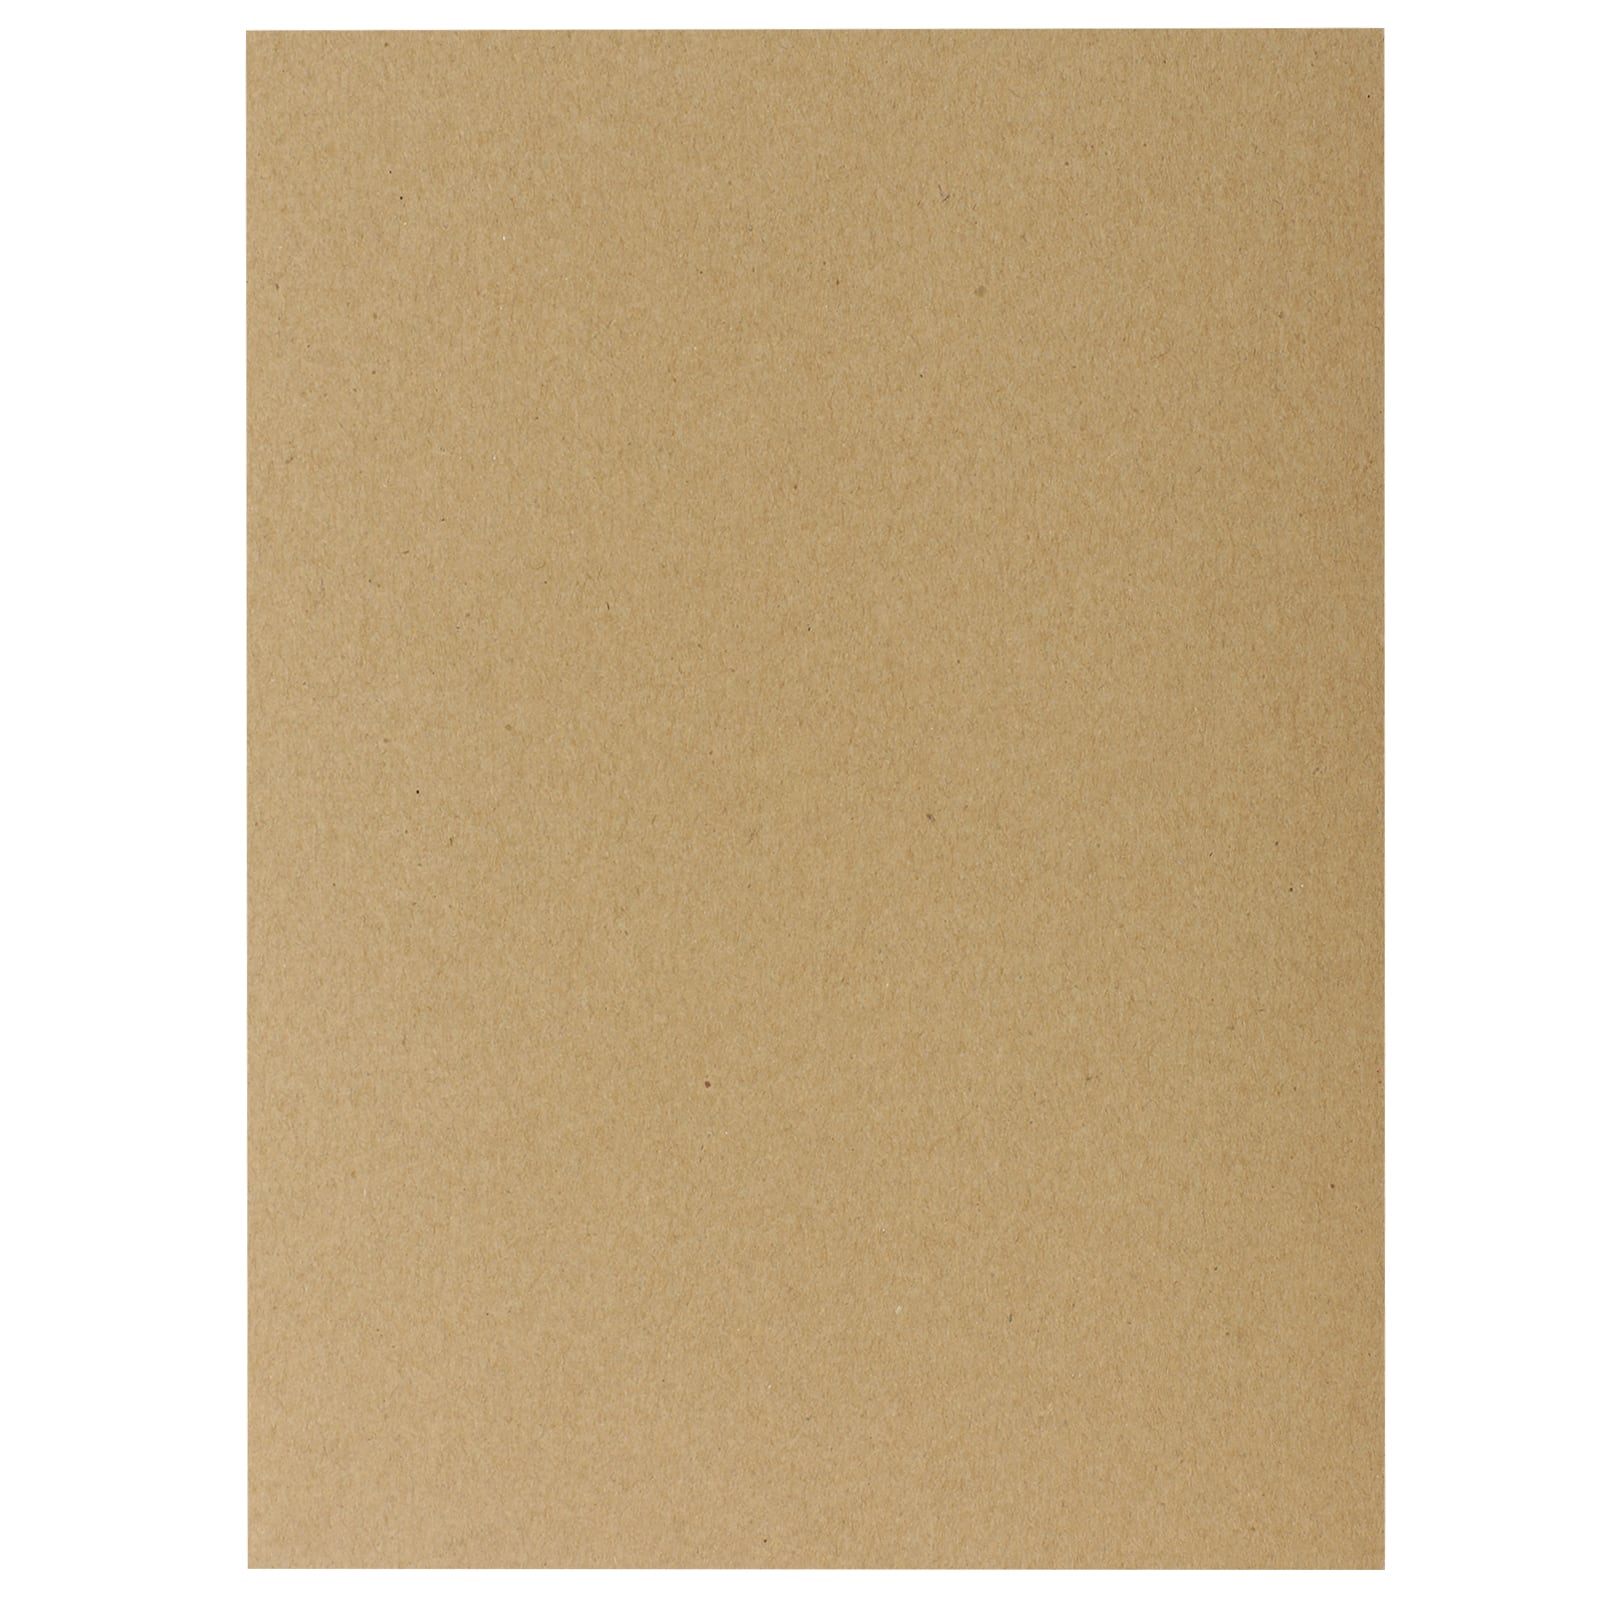 12 Packs: 100 ct. (1200 total) Kraft 5.5&#x22; x 7.5&#x22; Cardstock Paper by Recollections&#x2122;